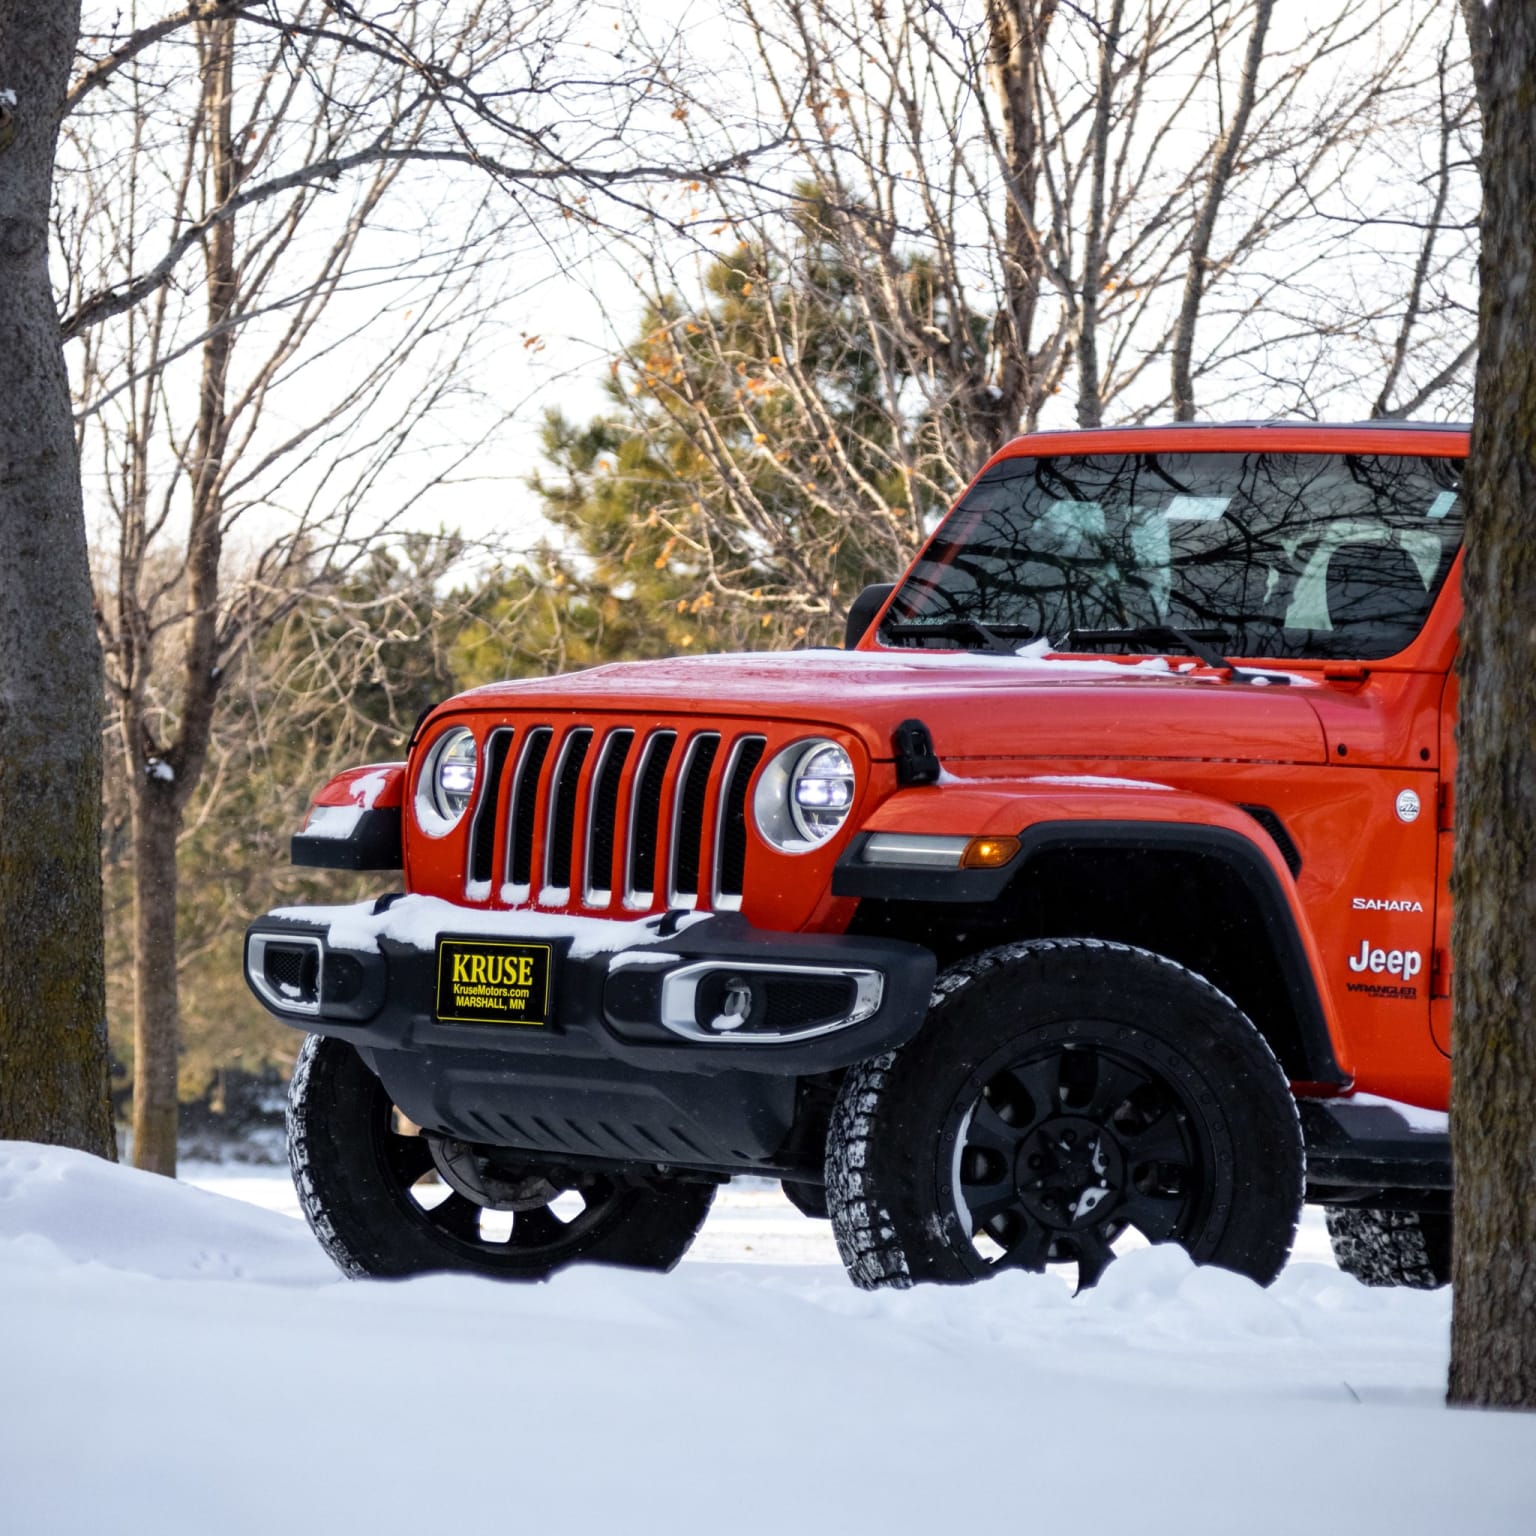 a red jeep is parked in the snow near some trees and a sign that says jeep on the side of the jeep